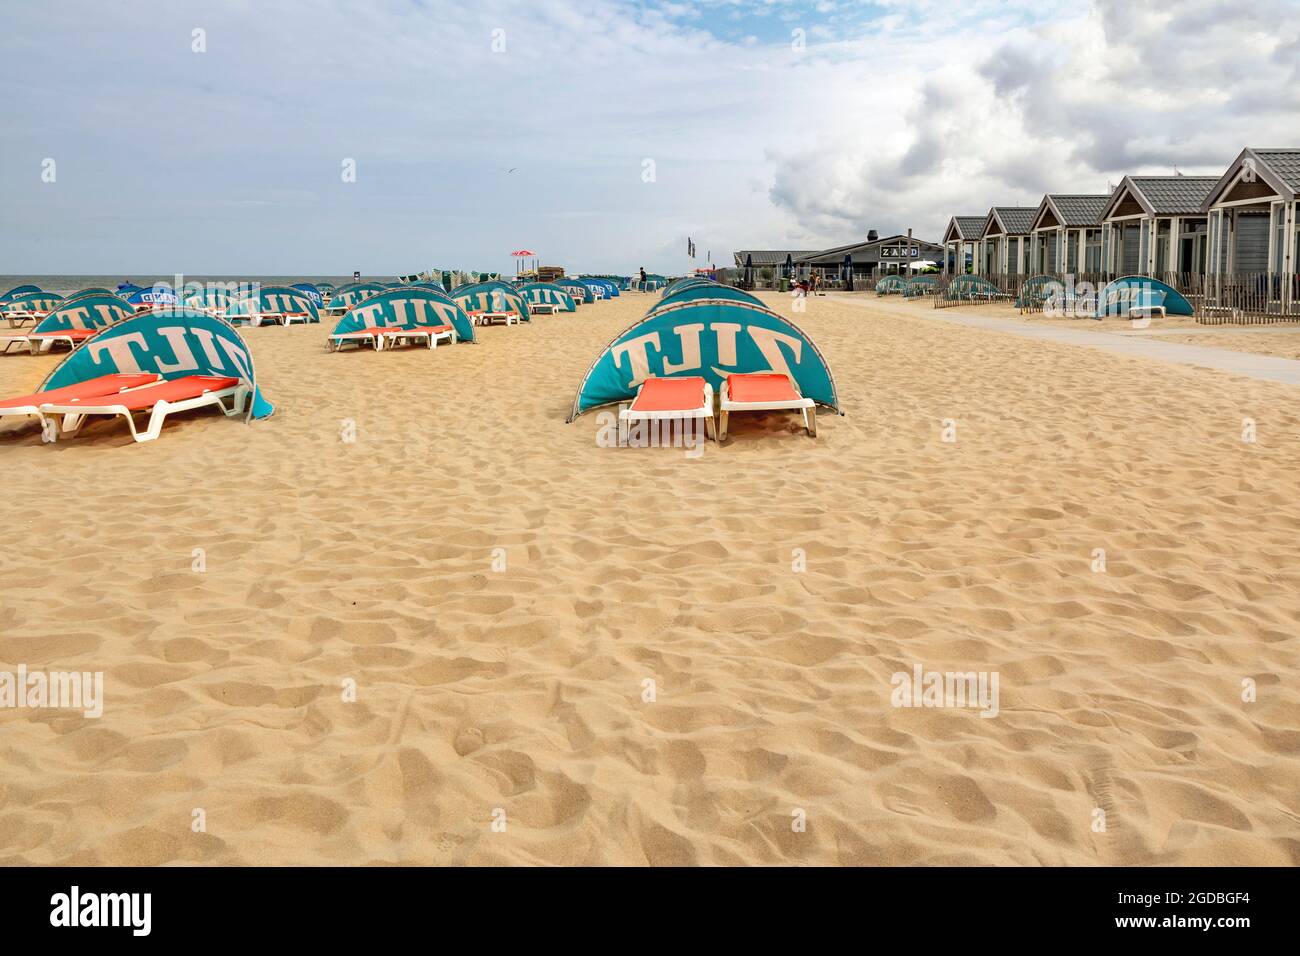 Beach in summer setting, decked out with chalets, windbreaks, sun loungers, awaiting visitors, Katwijk, South Holland, The Netherlands. Stock Photo